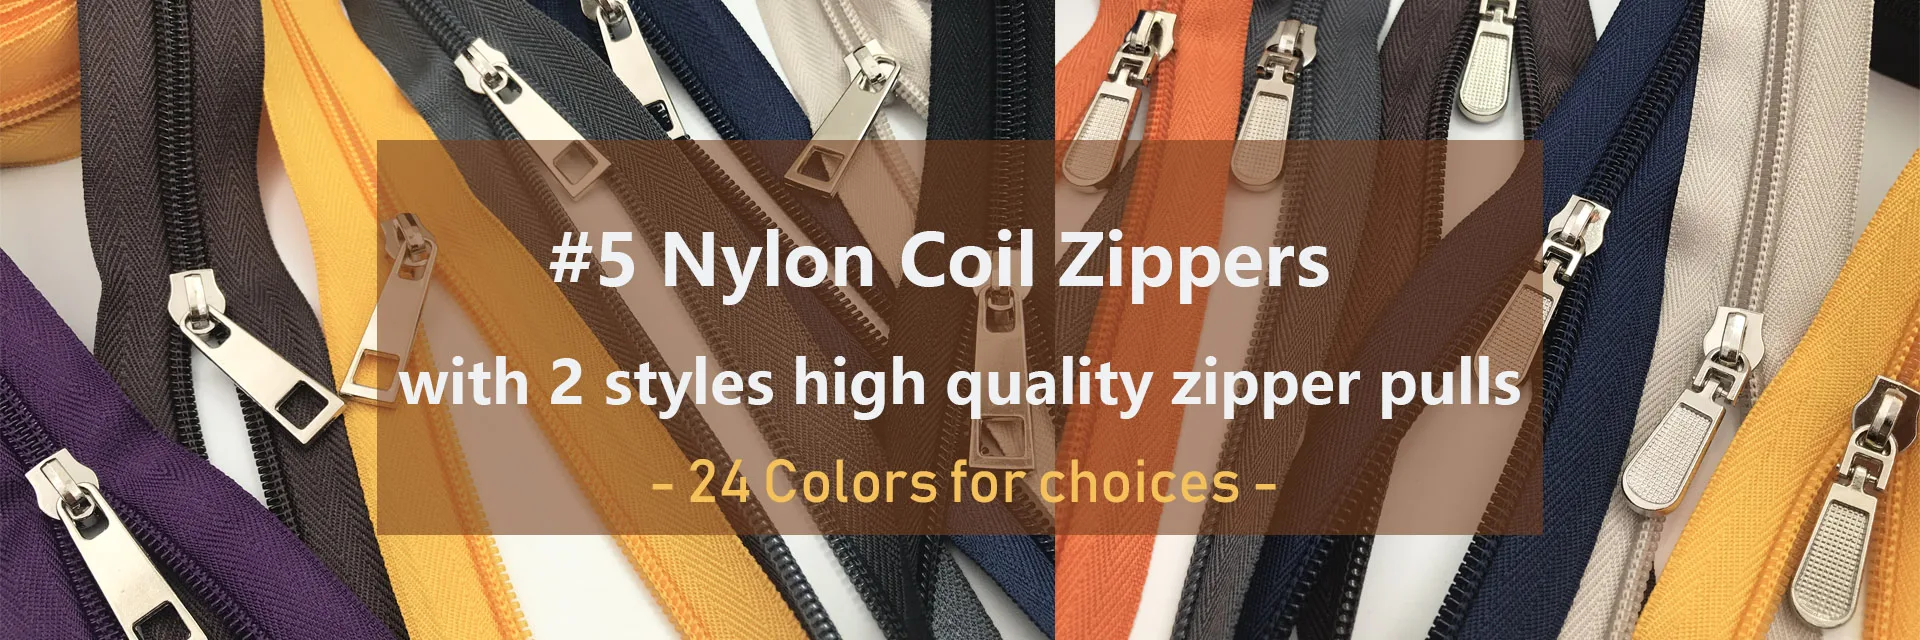 3# Bulk Nylon Coil Zippers with Zipper Sliders Beige Yard Zippers Wholesale  For DIY home Craft Sewing Garment Accessories